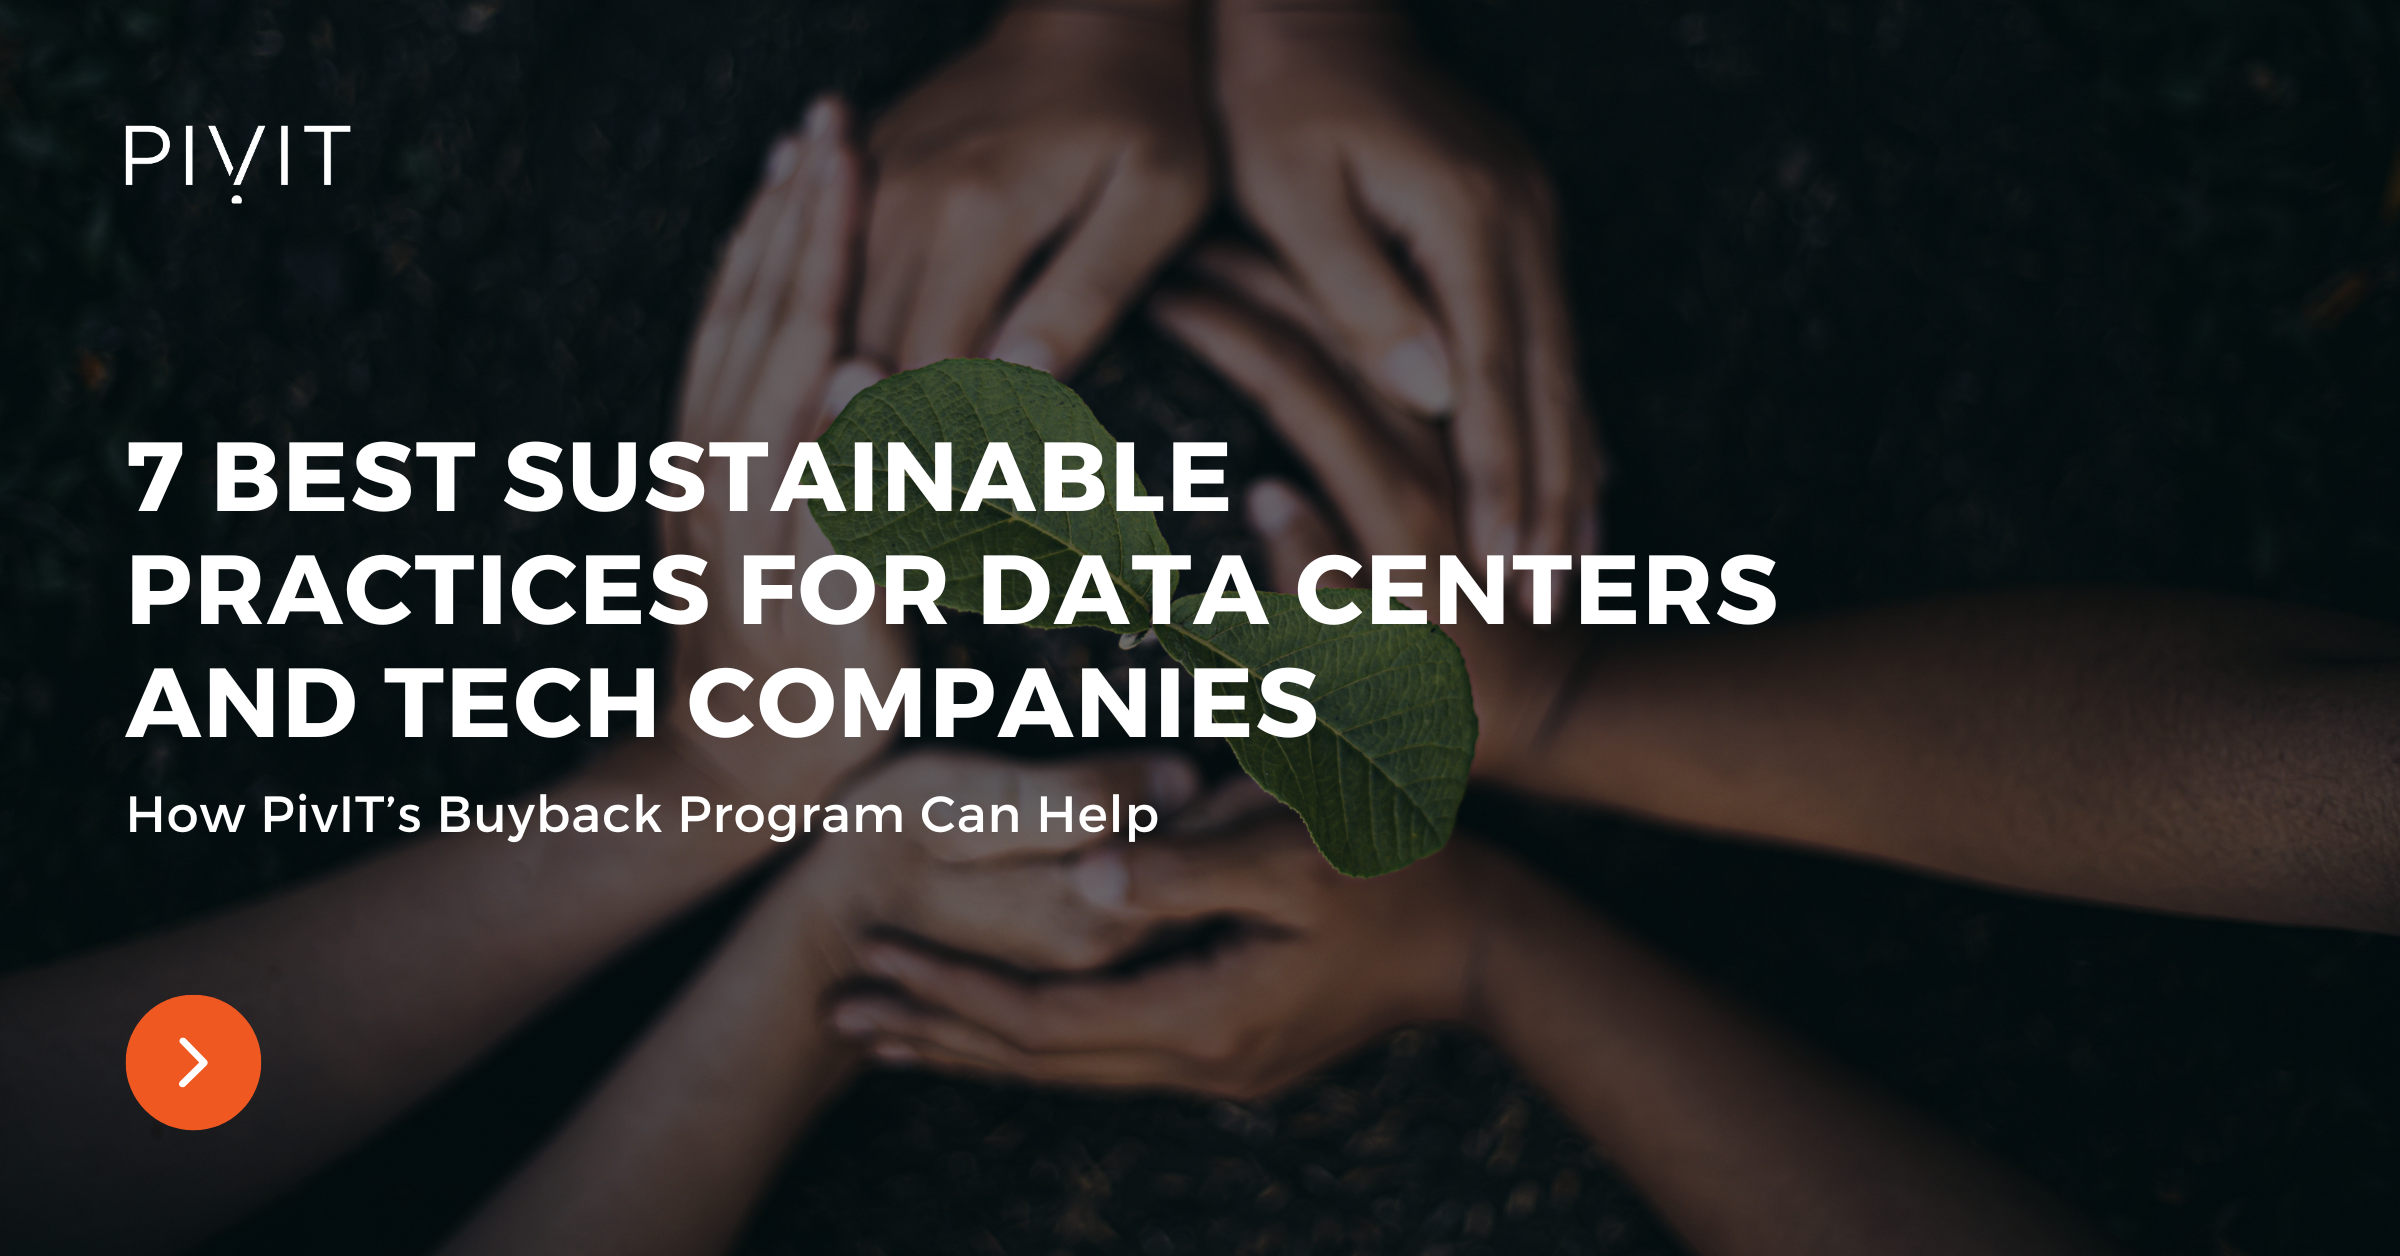 7 Best Sustainable Practices for Data Centers and Tech Companies